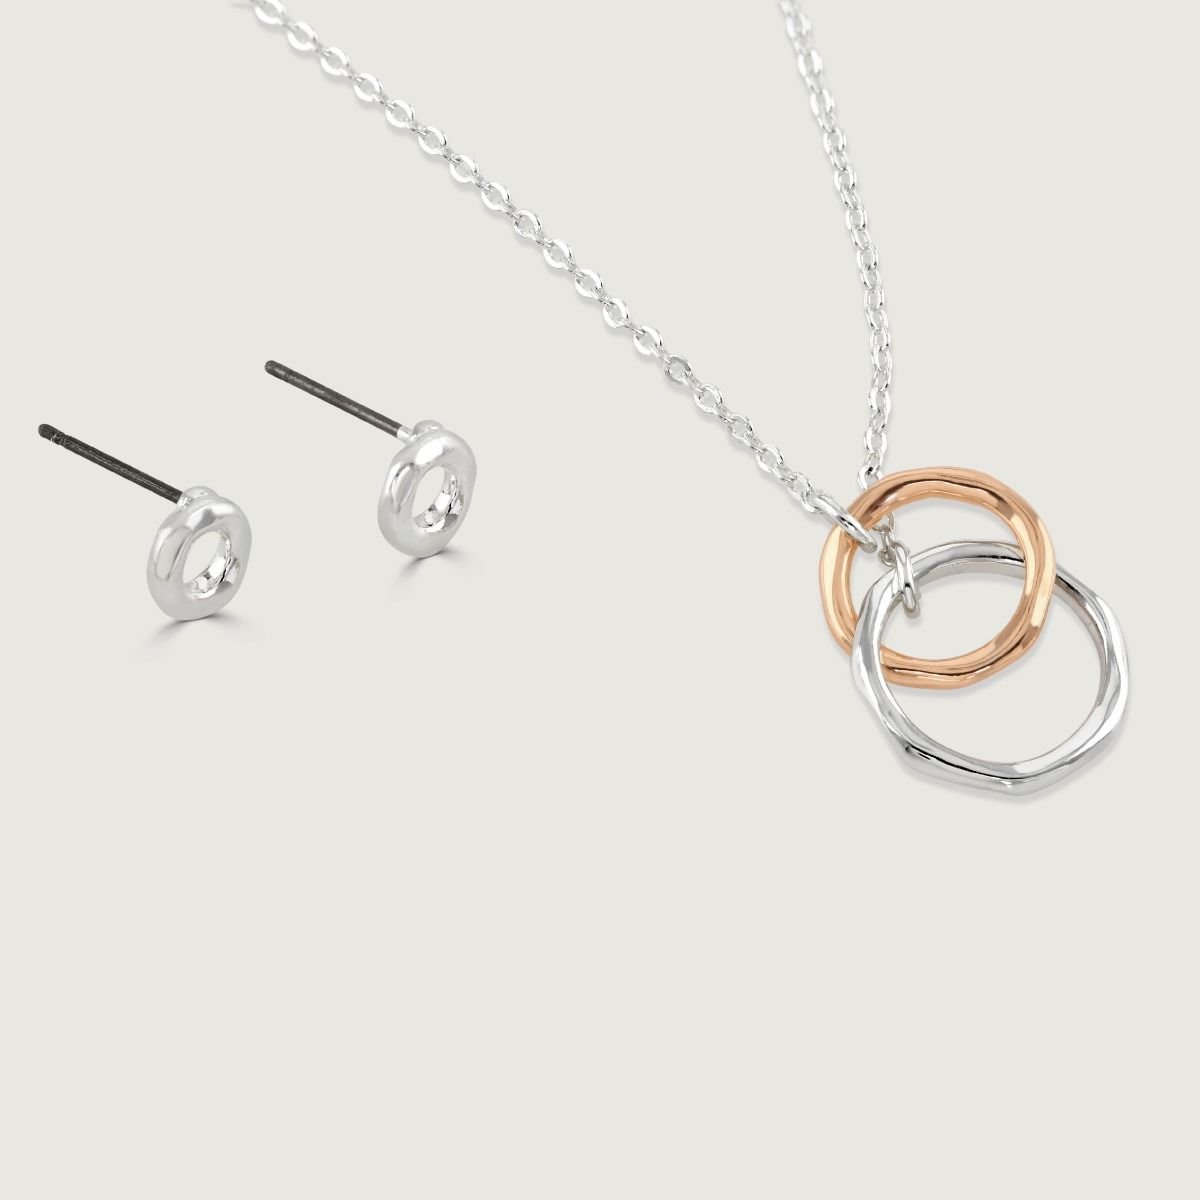 This beautifully delicate pendant features two free flowing rings entwined together and suspended on a silver-plated chain. The rose gold tone and silver-plated rings are complimented with a matching pair of stud earrings.